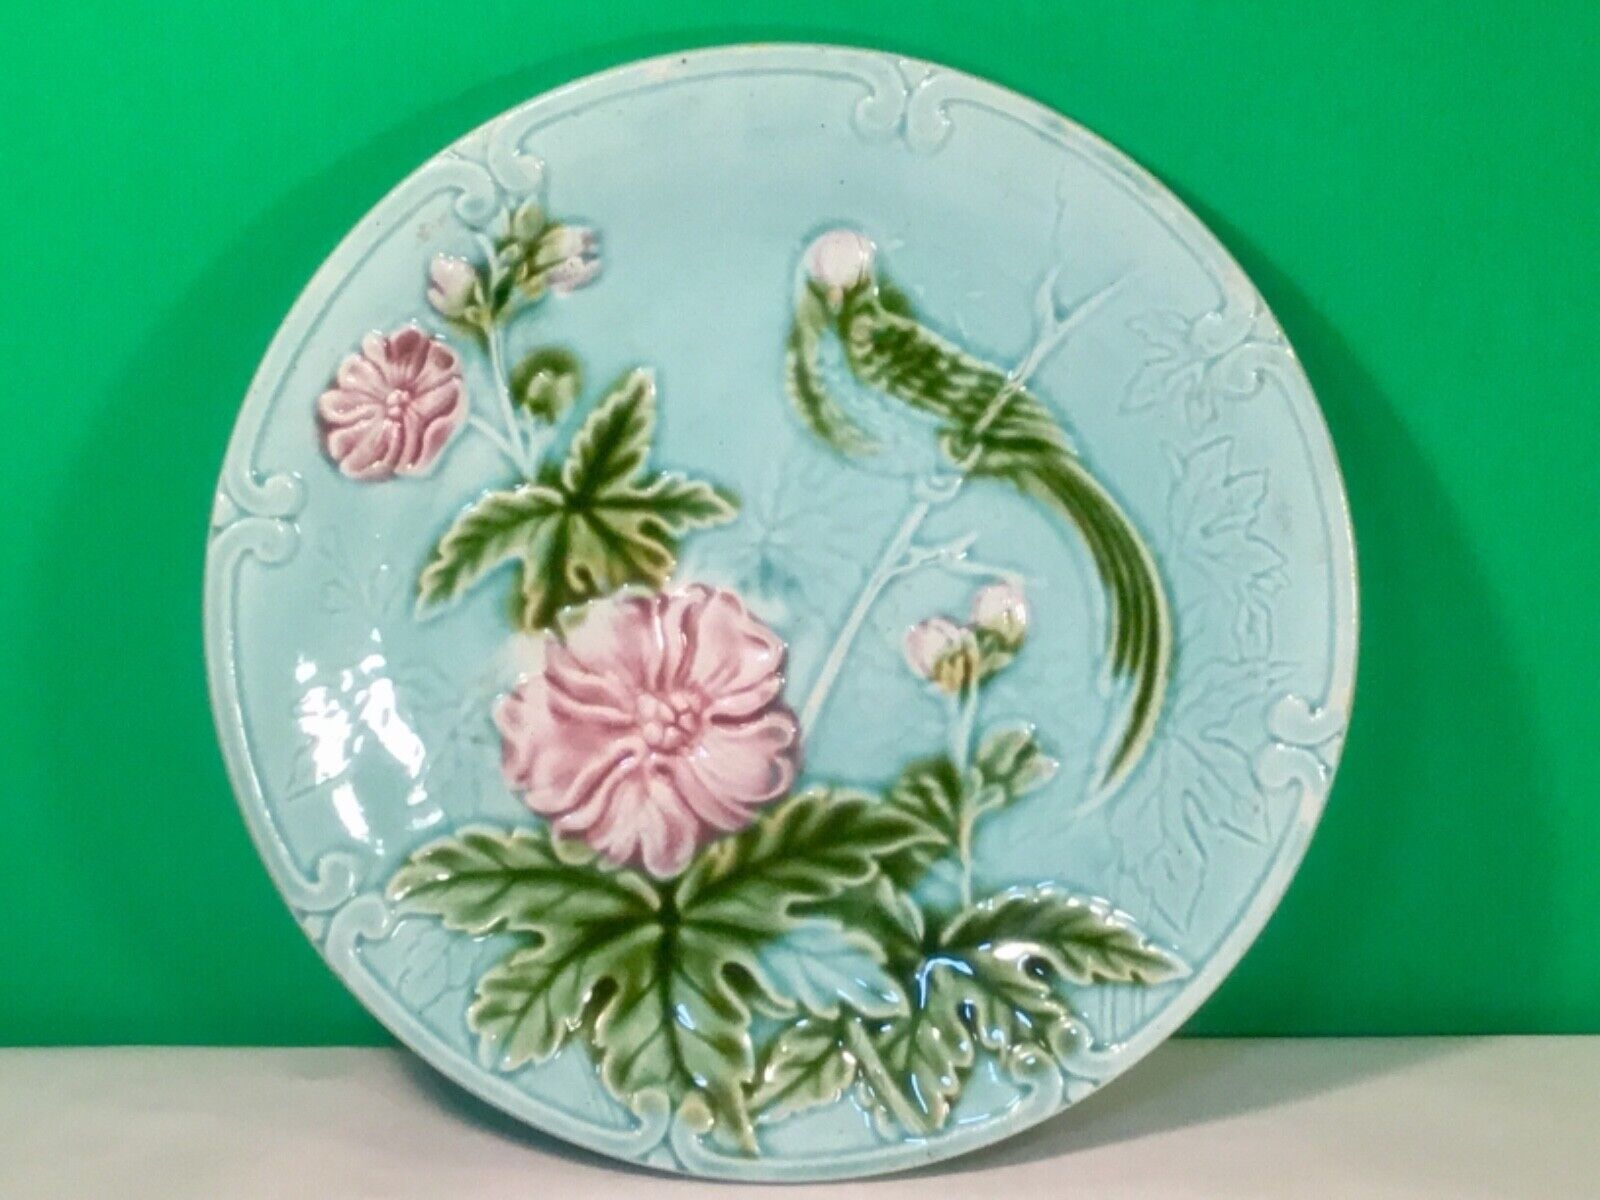 Antique Majolica Plate with Lovebird and Pink Flowers c.1800\'s